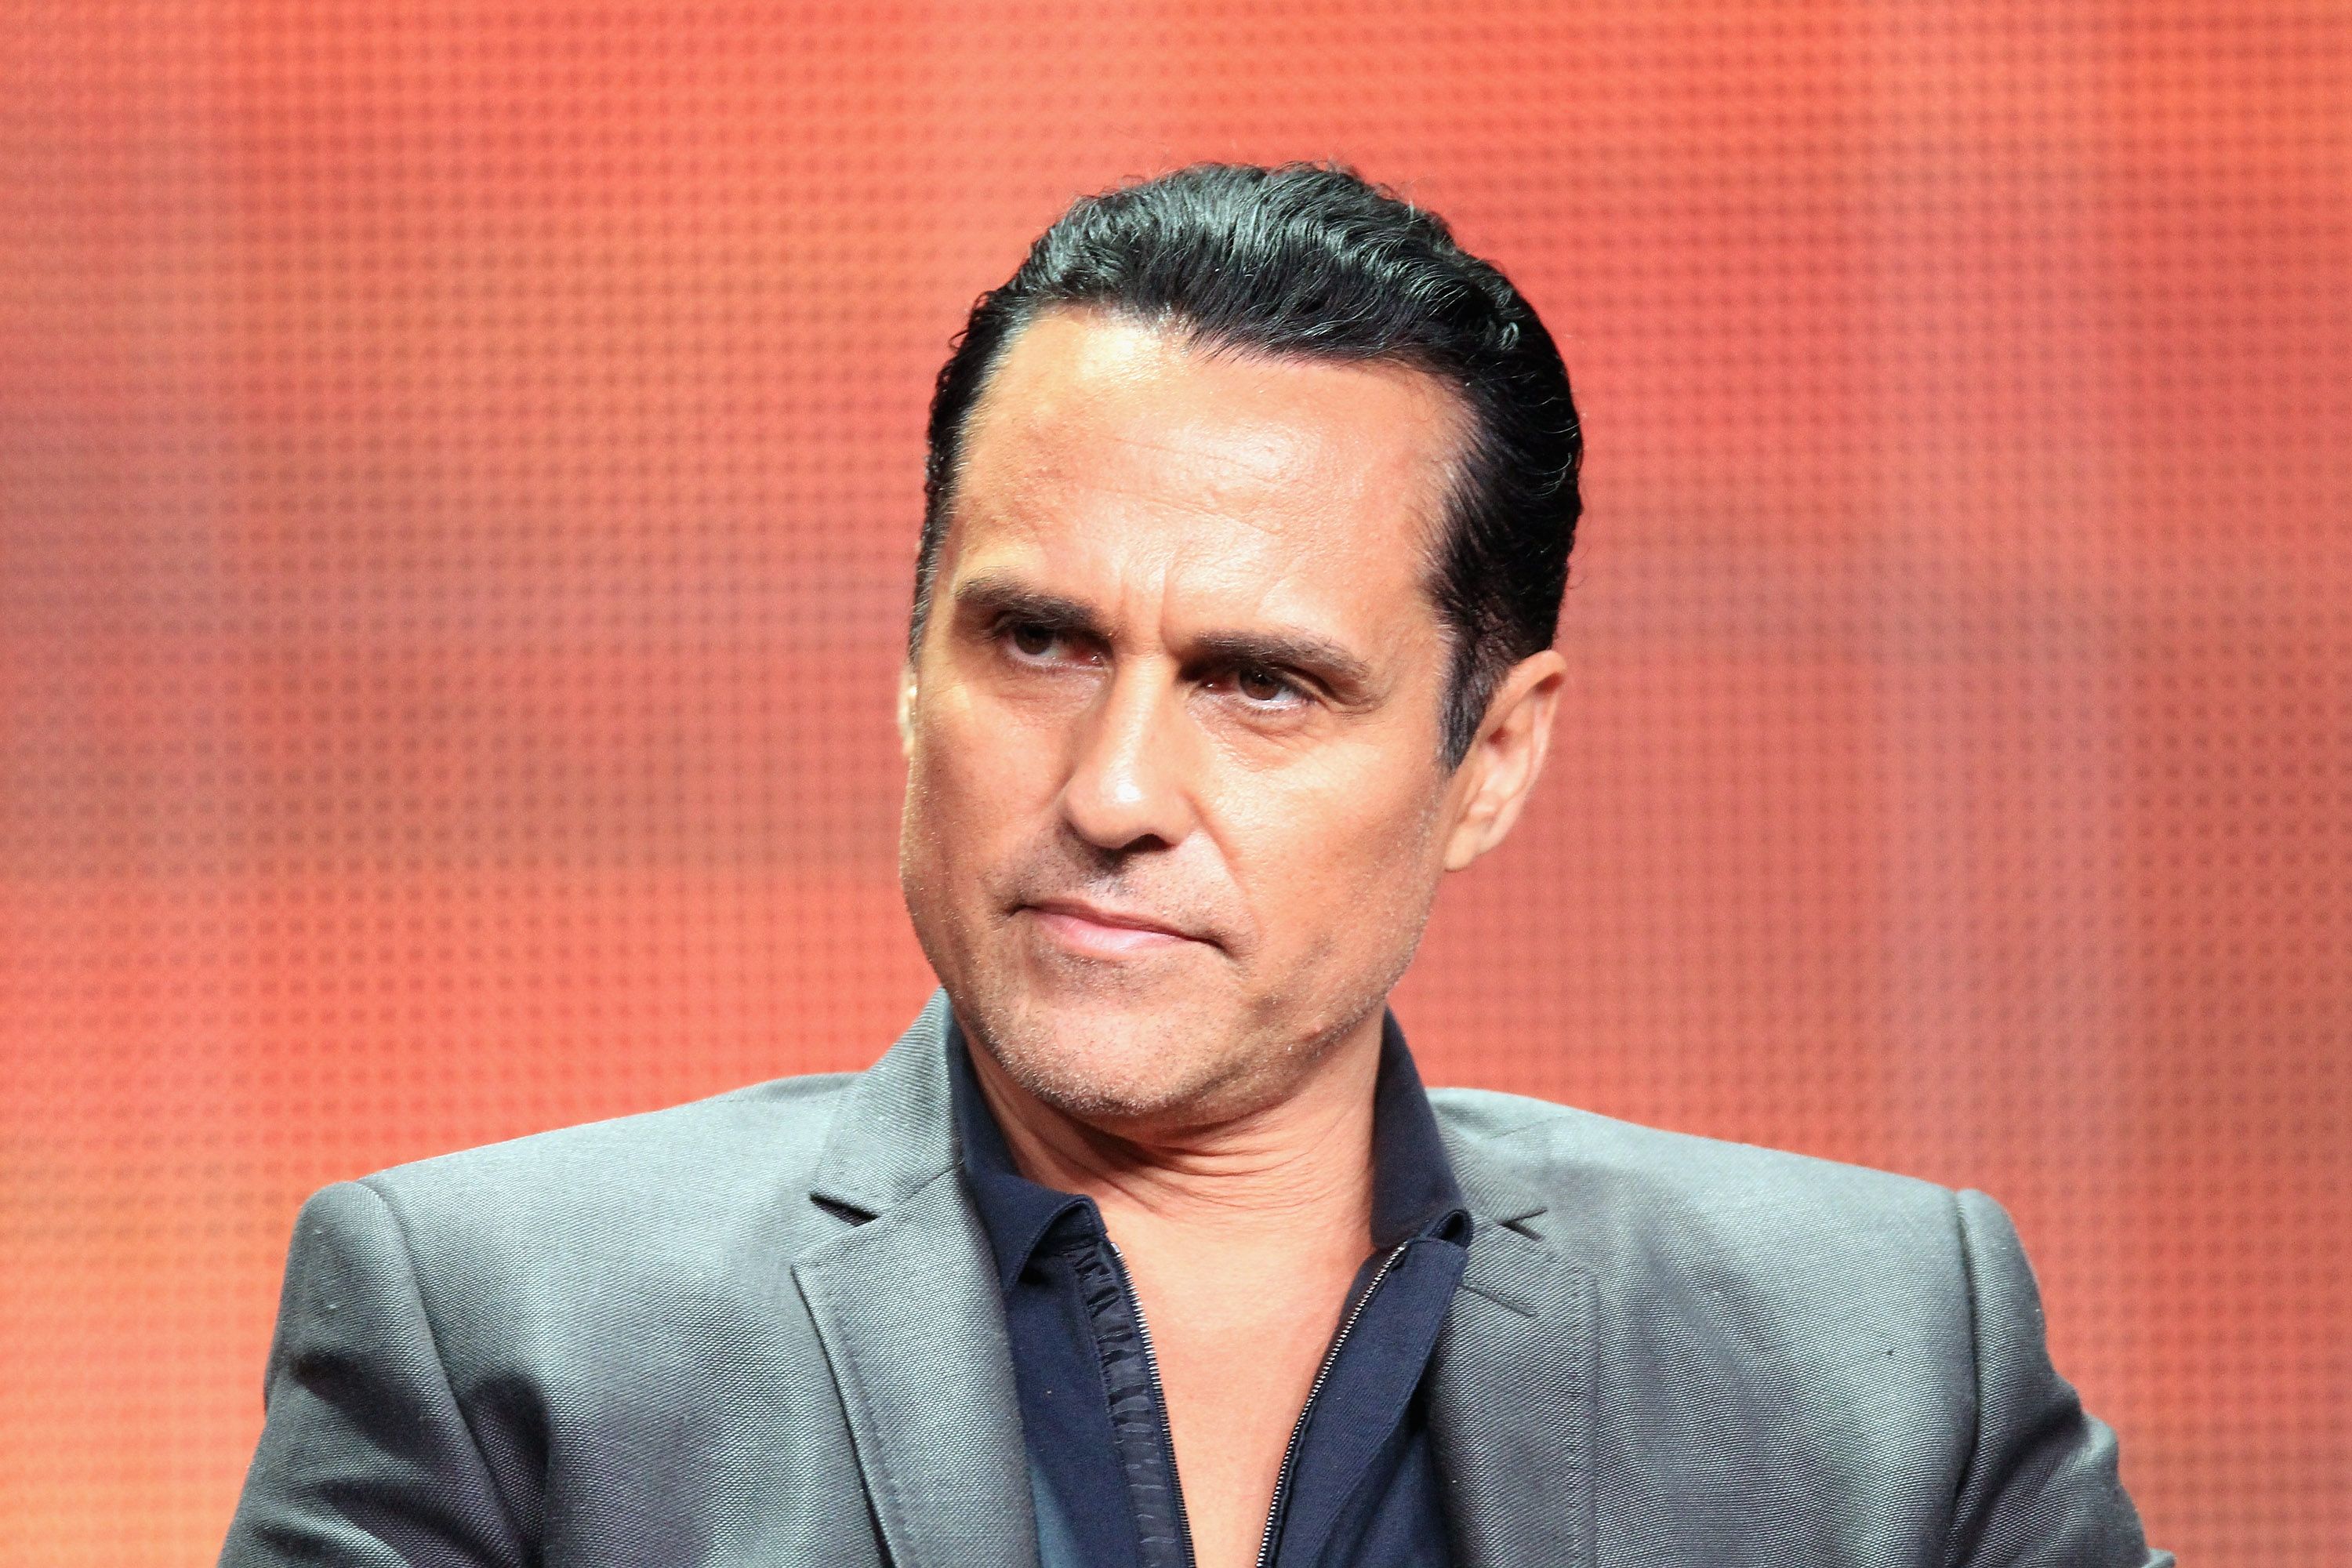 Maurice Benard at the "General Hospital" panel during the Summer TCA Tour on July 26, 2012, in Beverly Hills, California. | Source: Frederick M. Brown/Getty Images